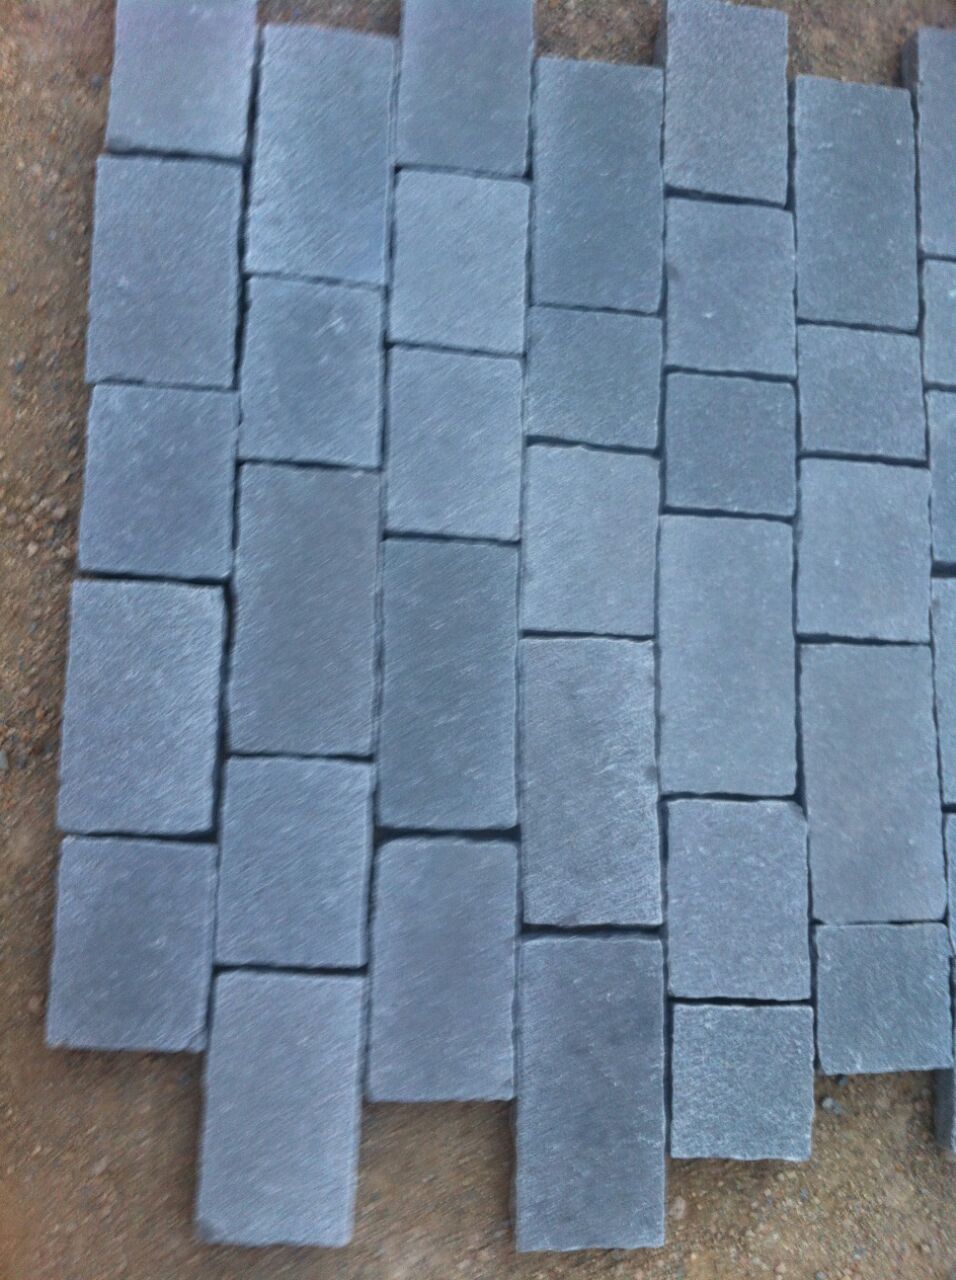 Sqaure natural Non Polished Cobble Stones, for Floor, Pattern : Plain